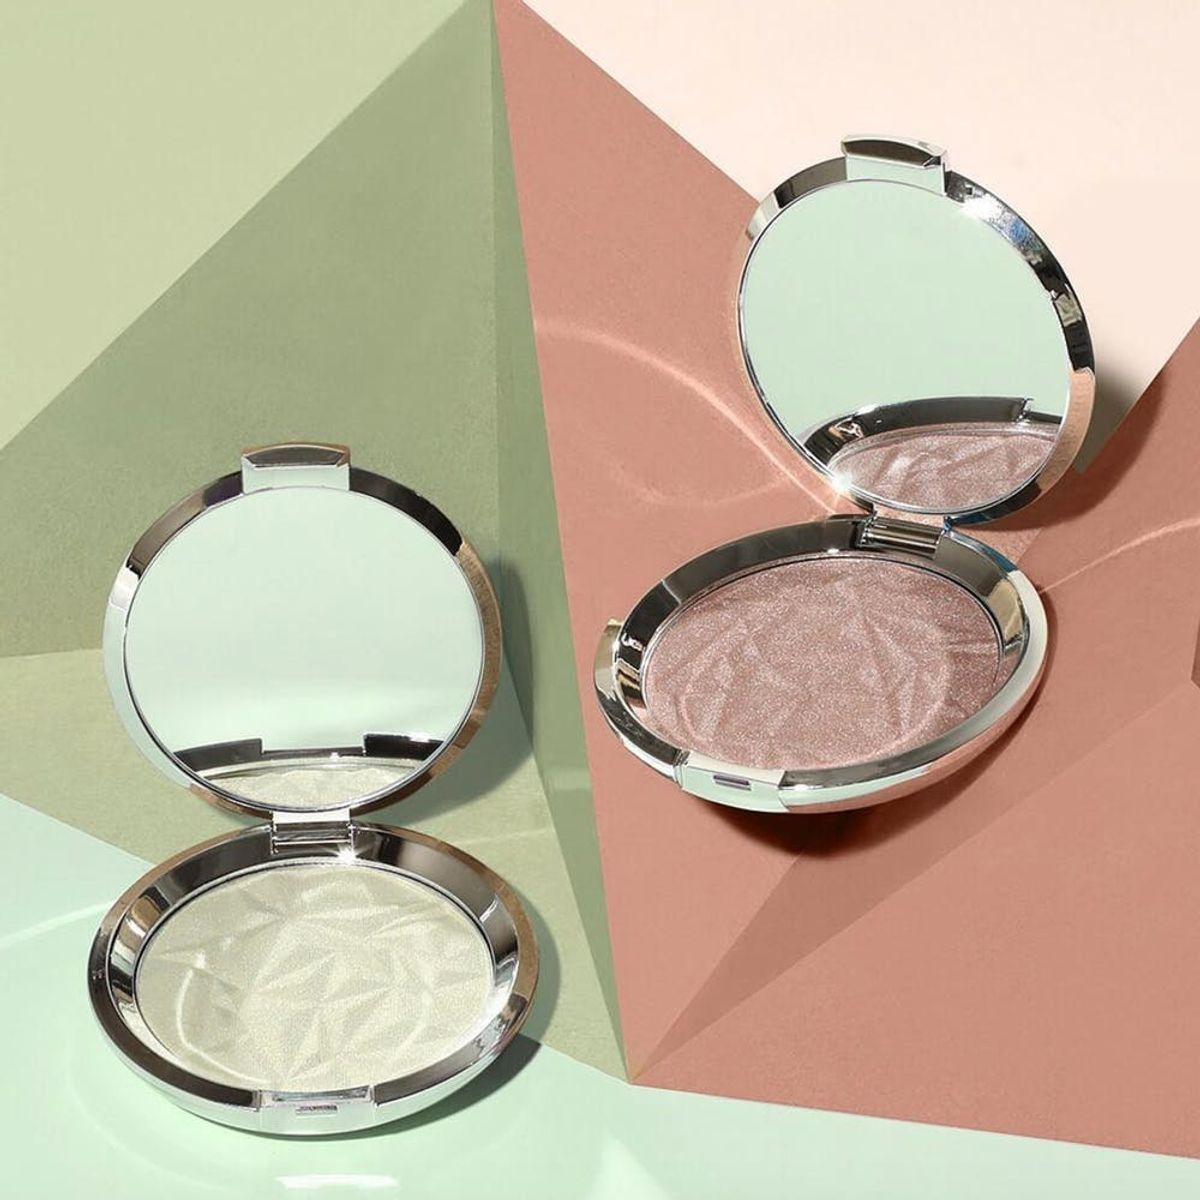 Becca Cosmetics’ New Highlighter Could Be… Green?!